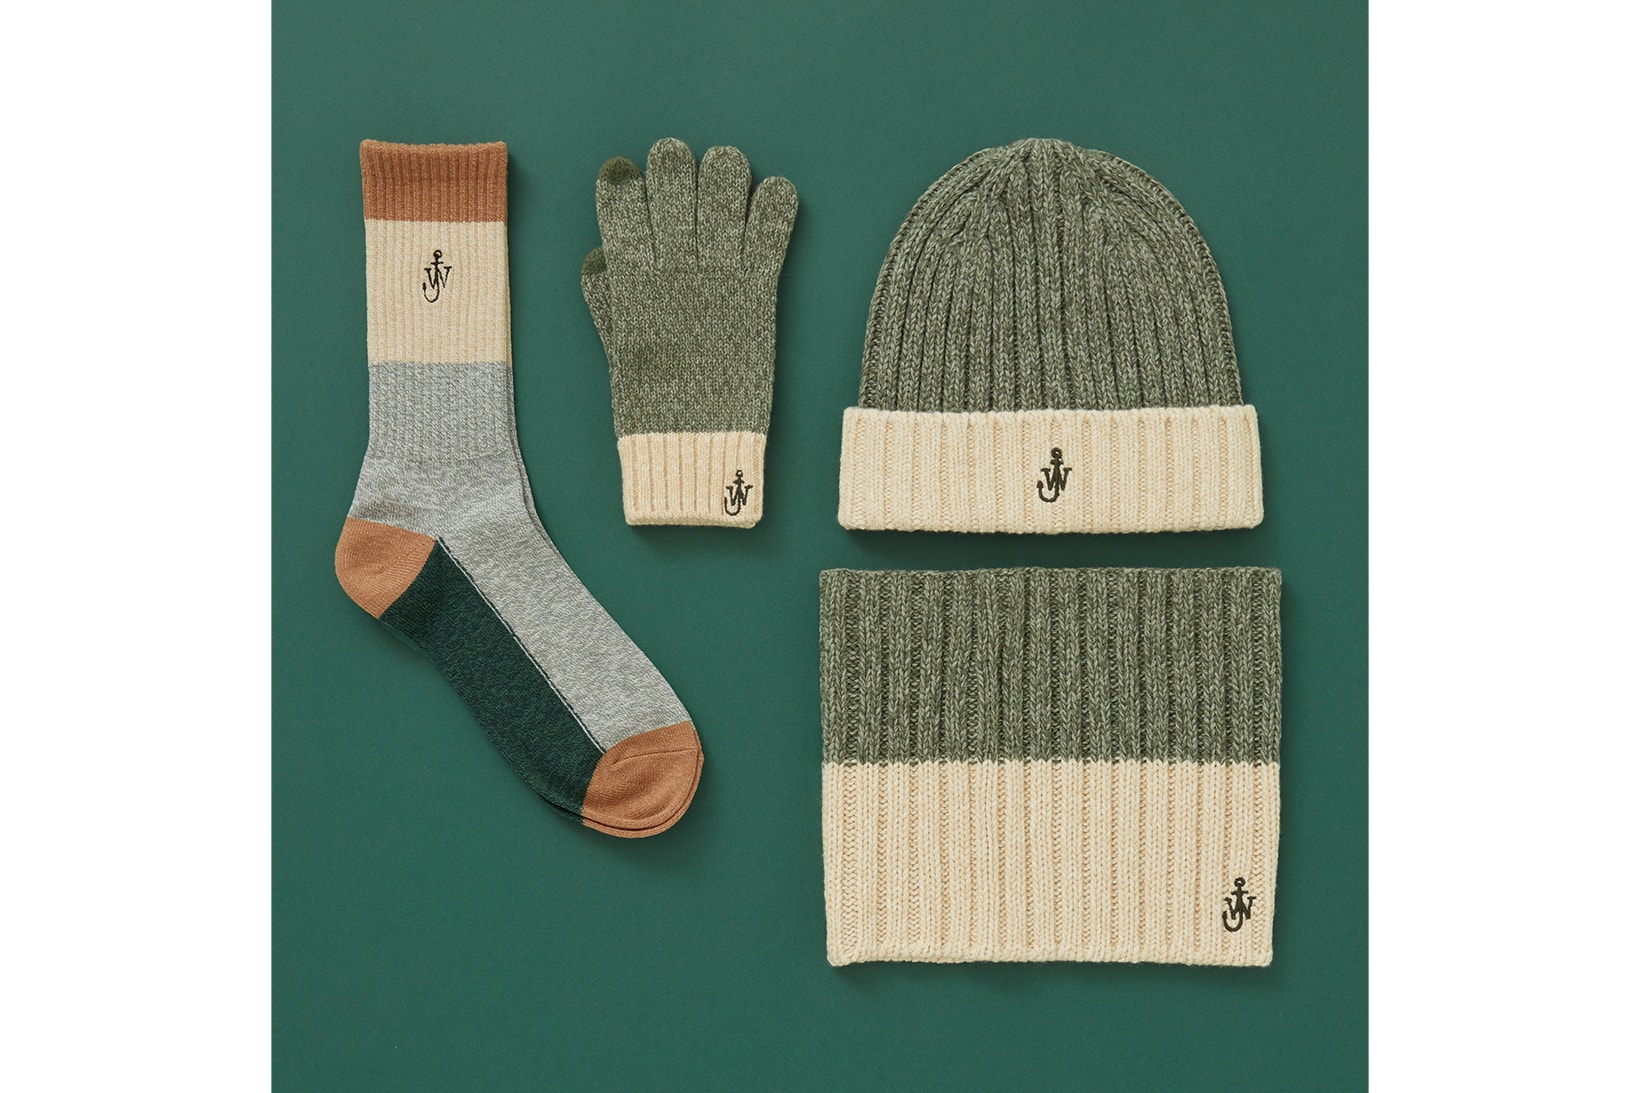 uniqlo jw anderson holiday collaboration accessories beanies gloves scarves socks